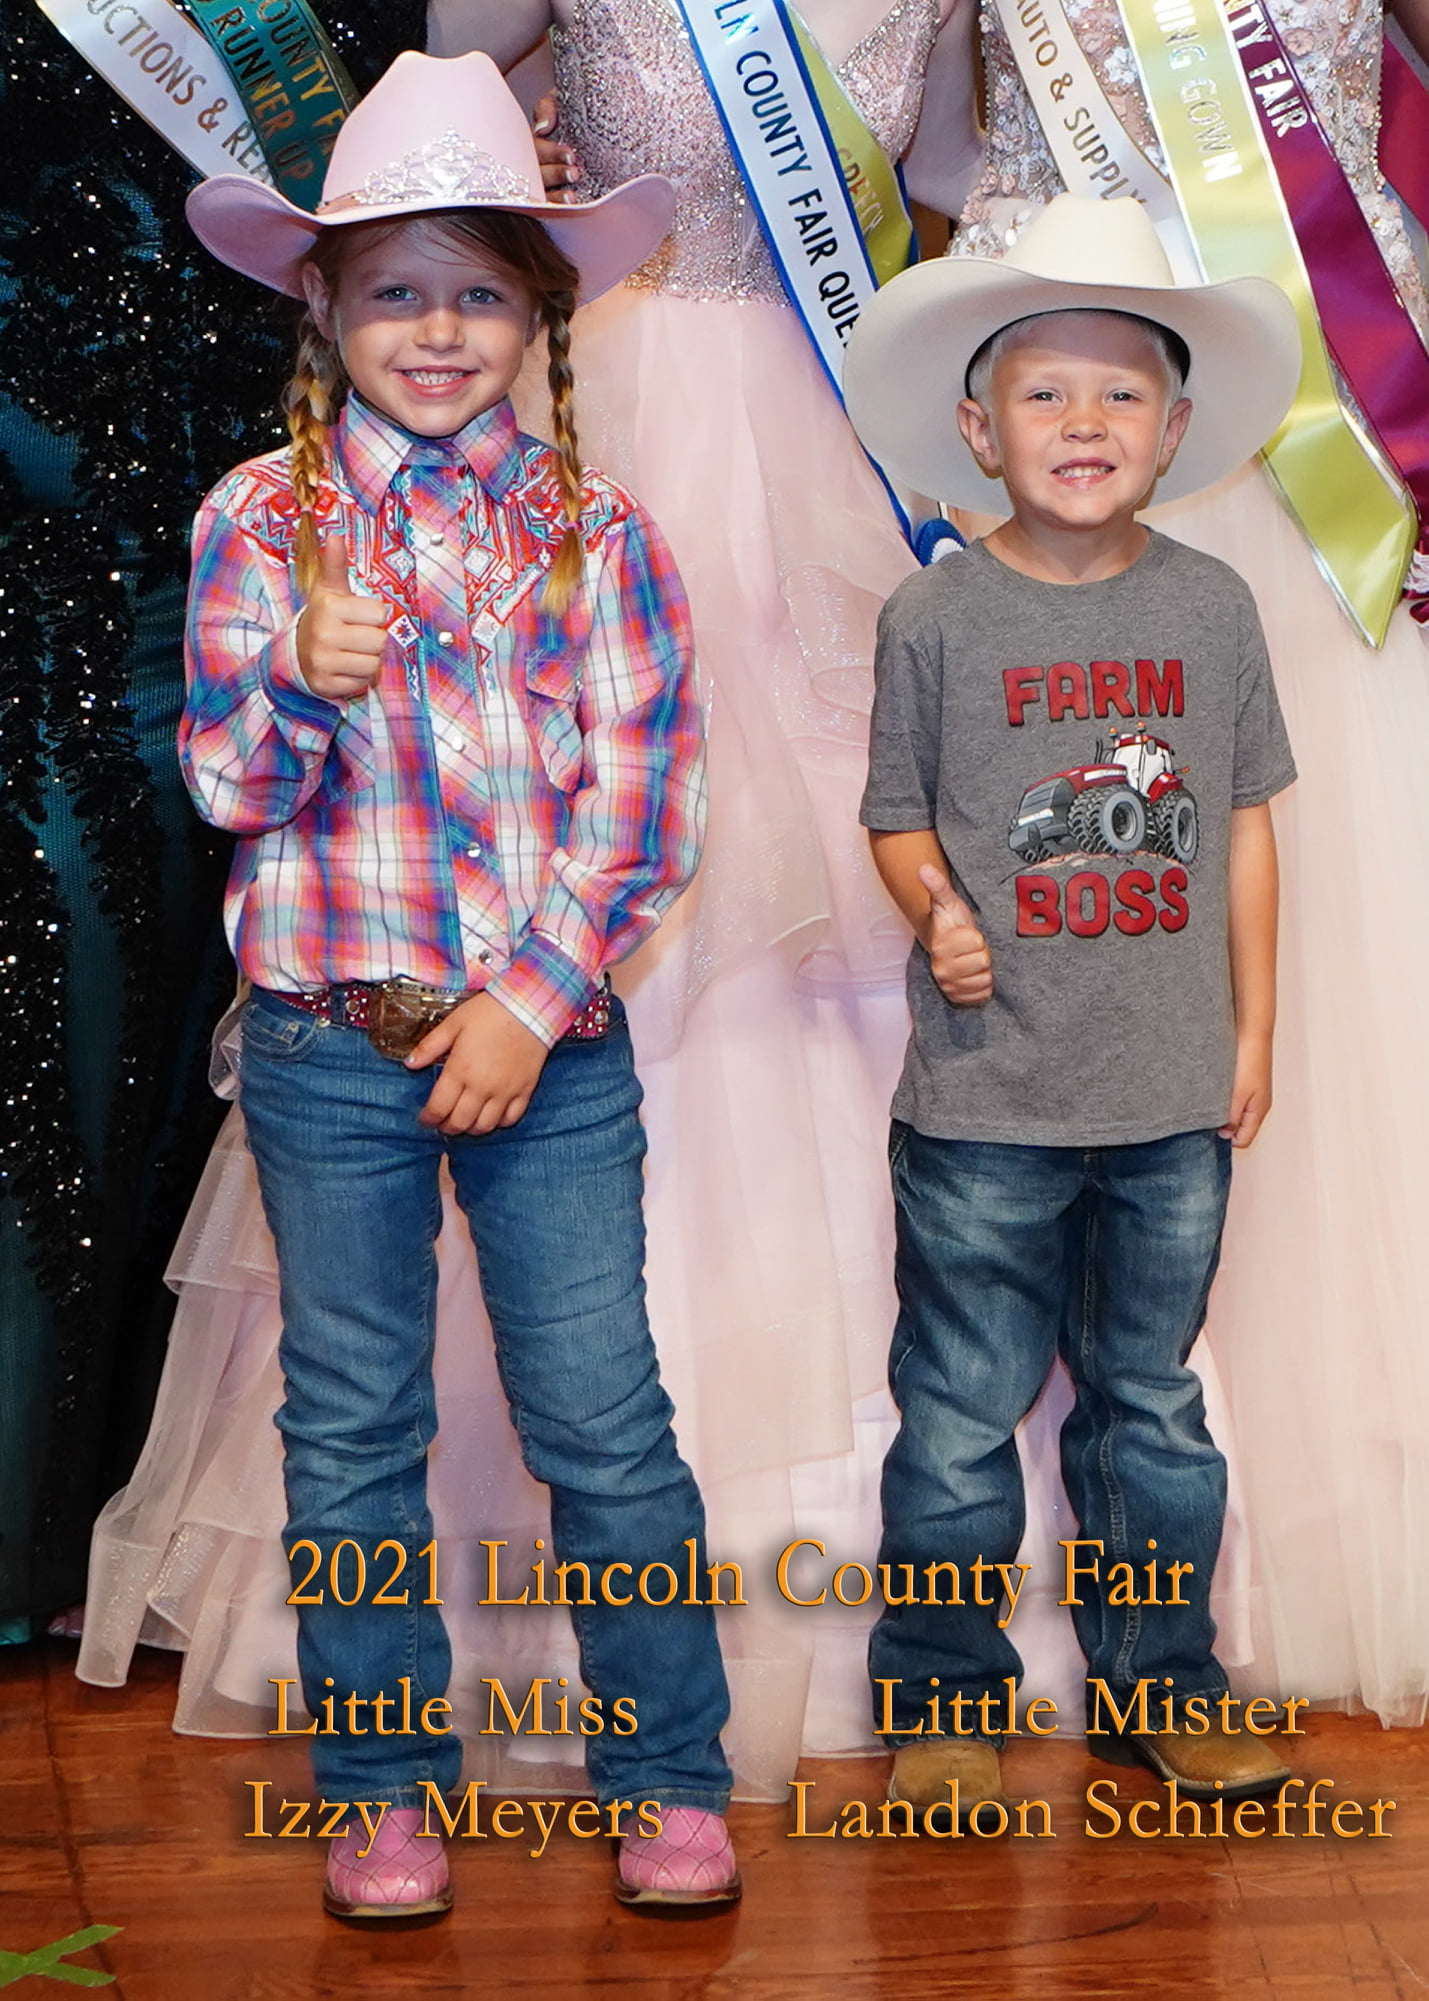 LITTLE MR. AND MISS LINCOLN COUNTY FAIR